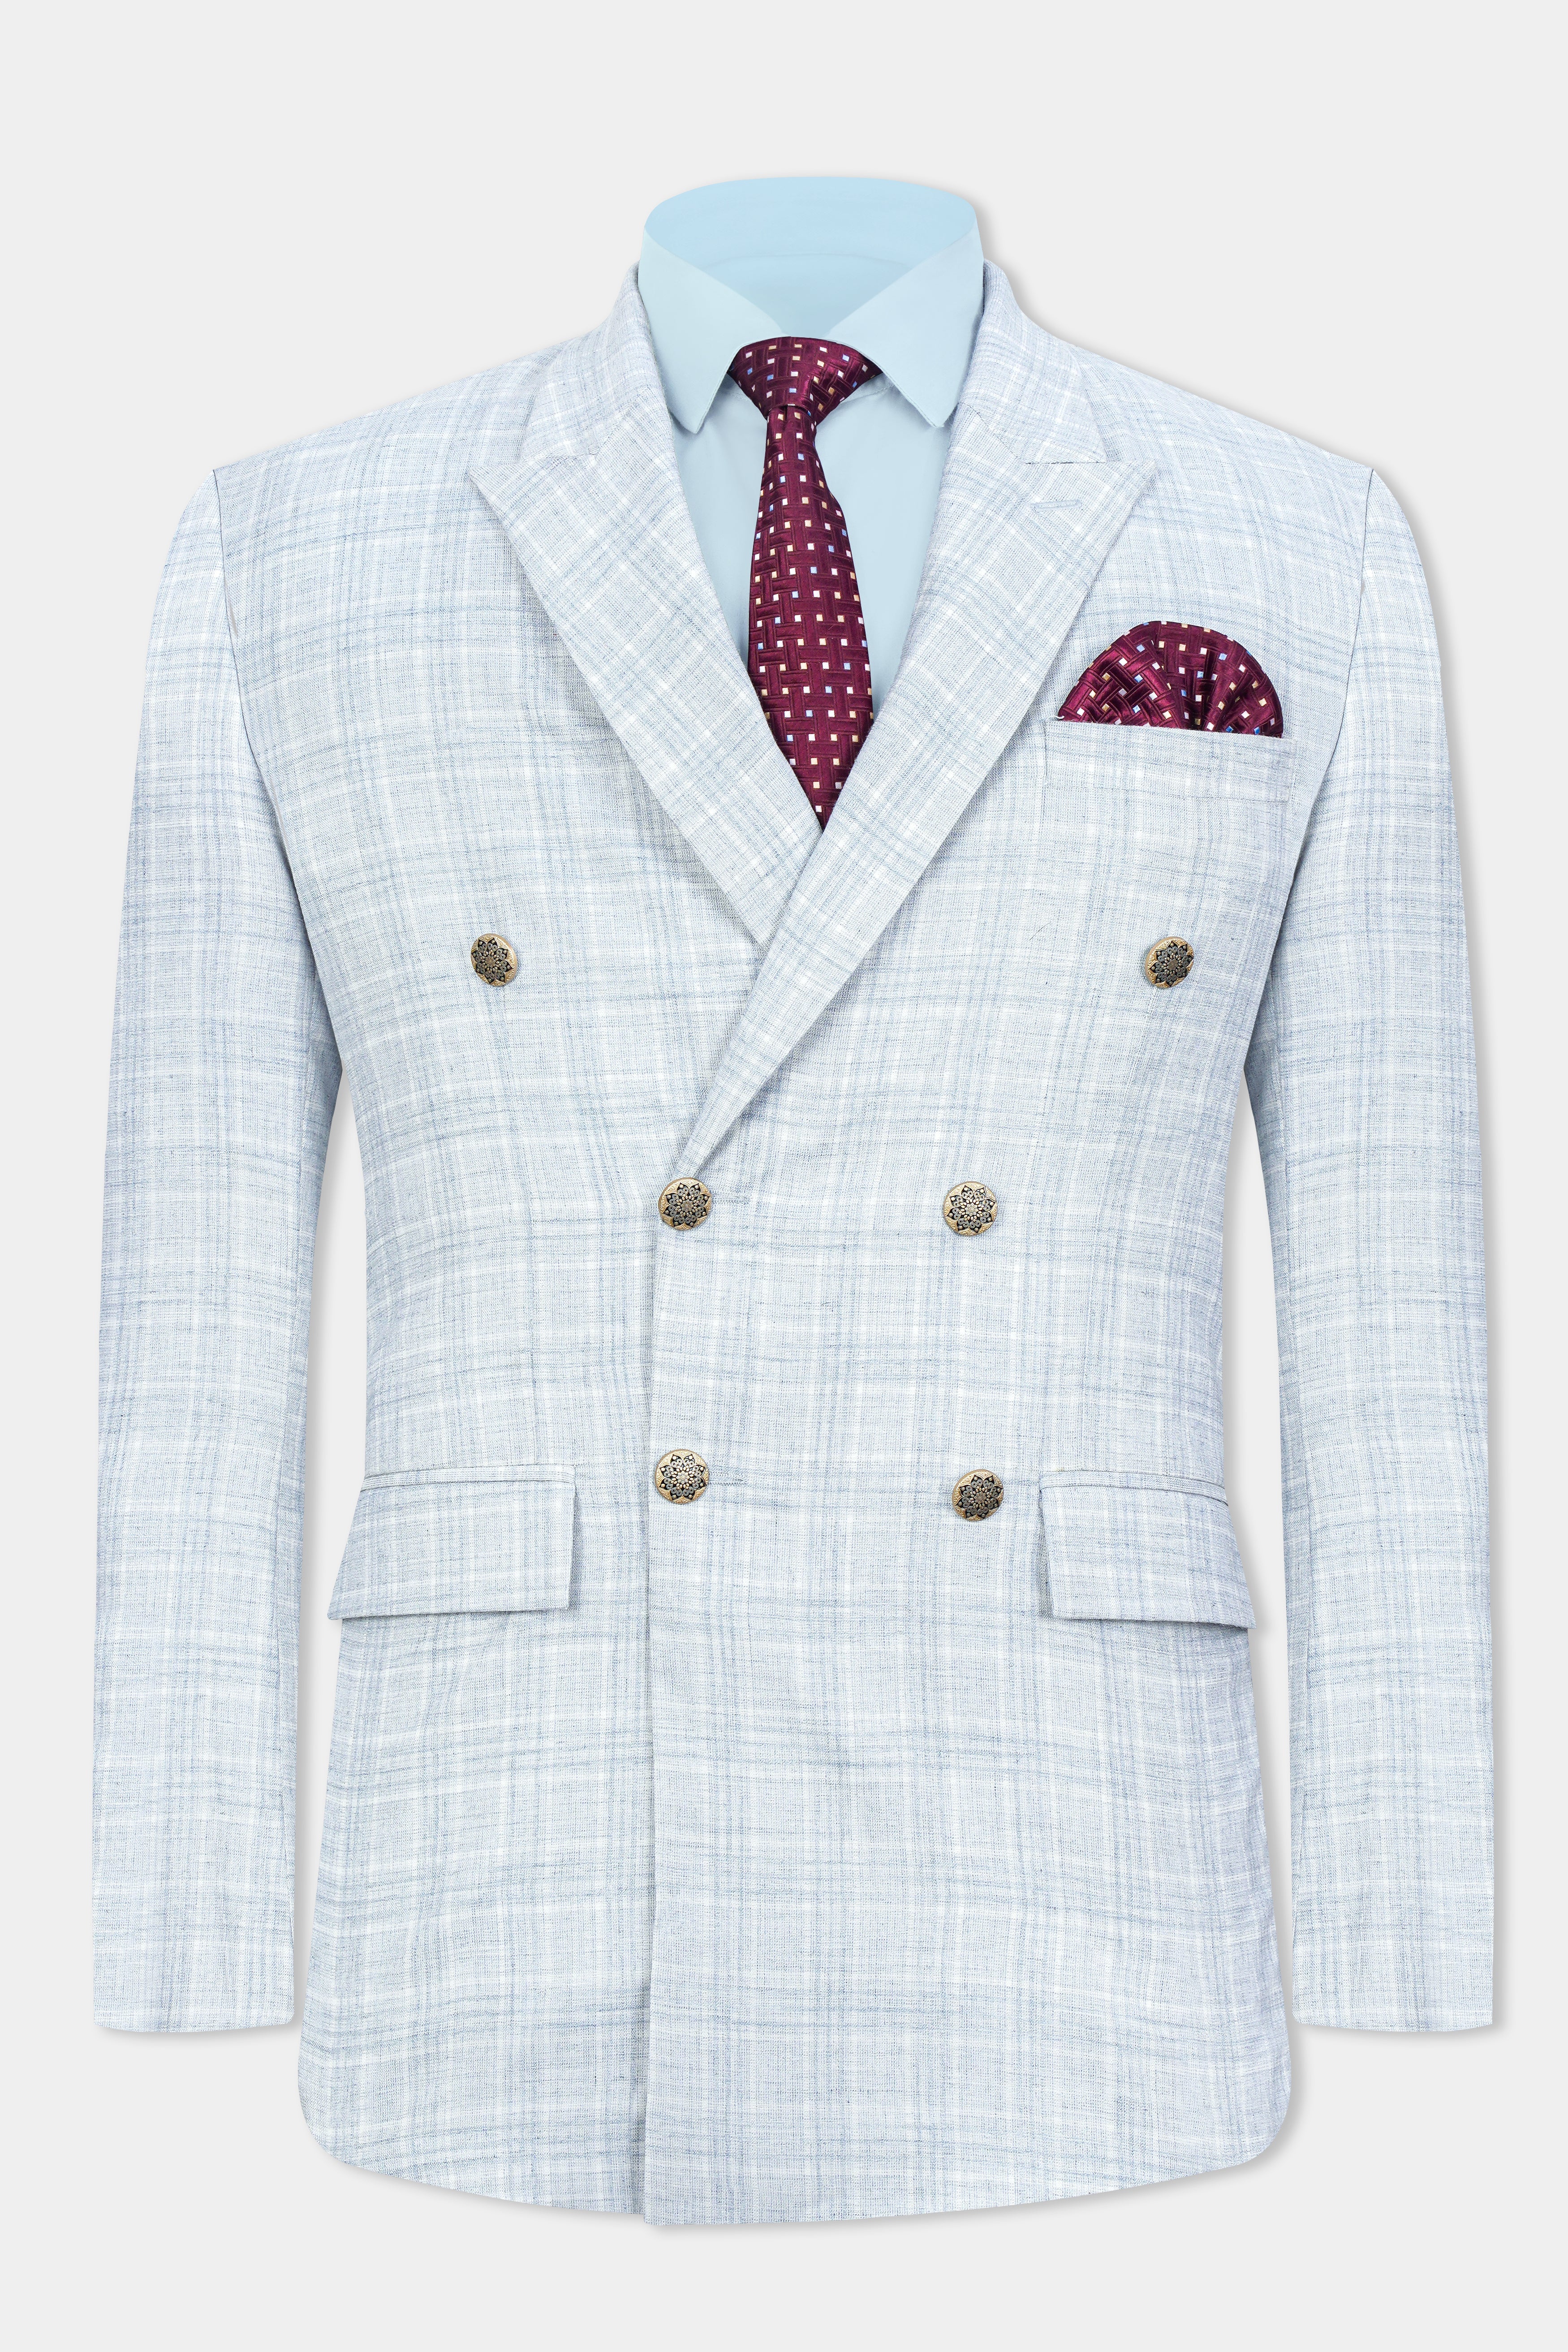 Gainsboro Blue Plaid Wool Rich Double Breasted Blazer BL3076-DB-GB-36, BL3076-DB-GB-38, BL3076-DB-GB-40, BL3076-DB-GB-42, BL3076-DB-GB-44, BL3076-DB-GB-46, BL3076-DB-GB-48, BL3076-DB-GB-50, BL3076-DB-GB-52, BL3076-DB-GB-54, BL3076-DB-GB-56, BL3076-DB-GB-58, BL3076-DB-GB-60